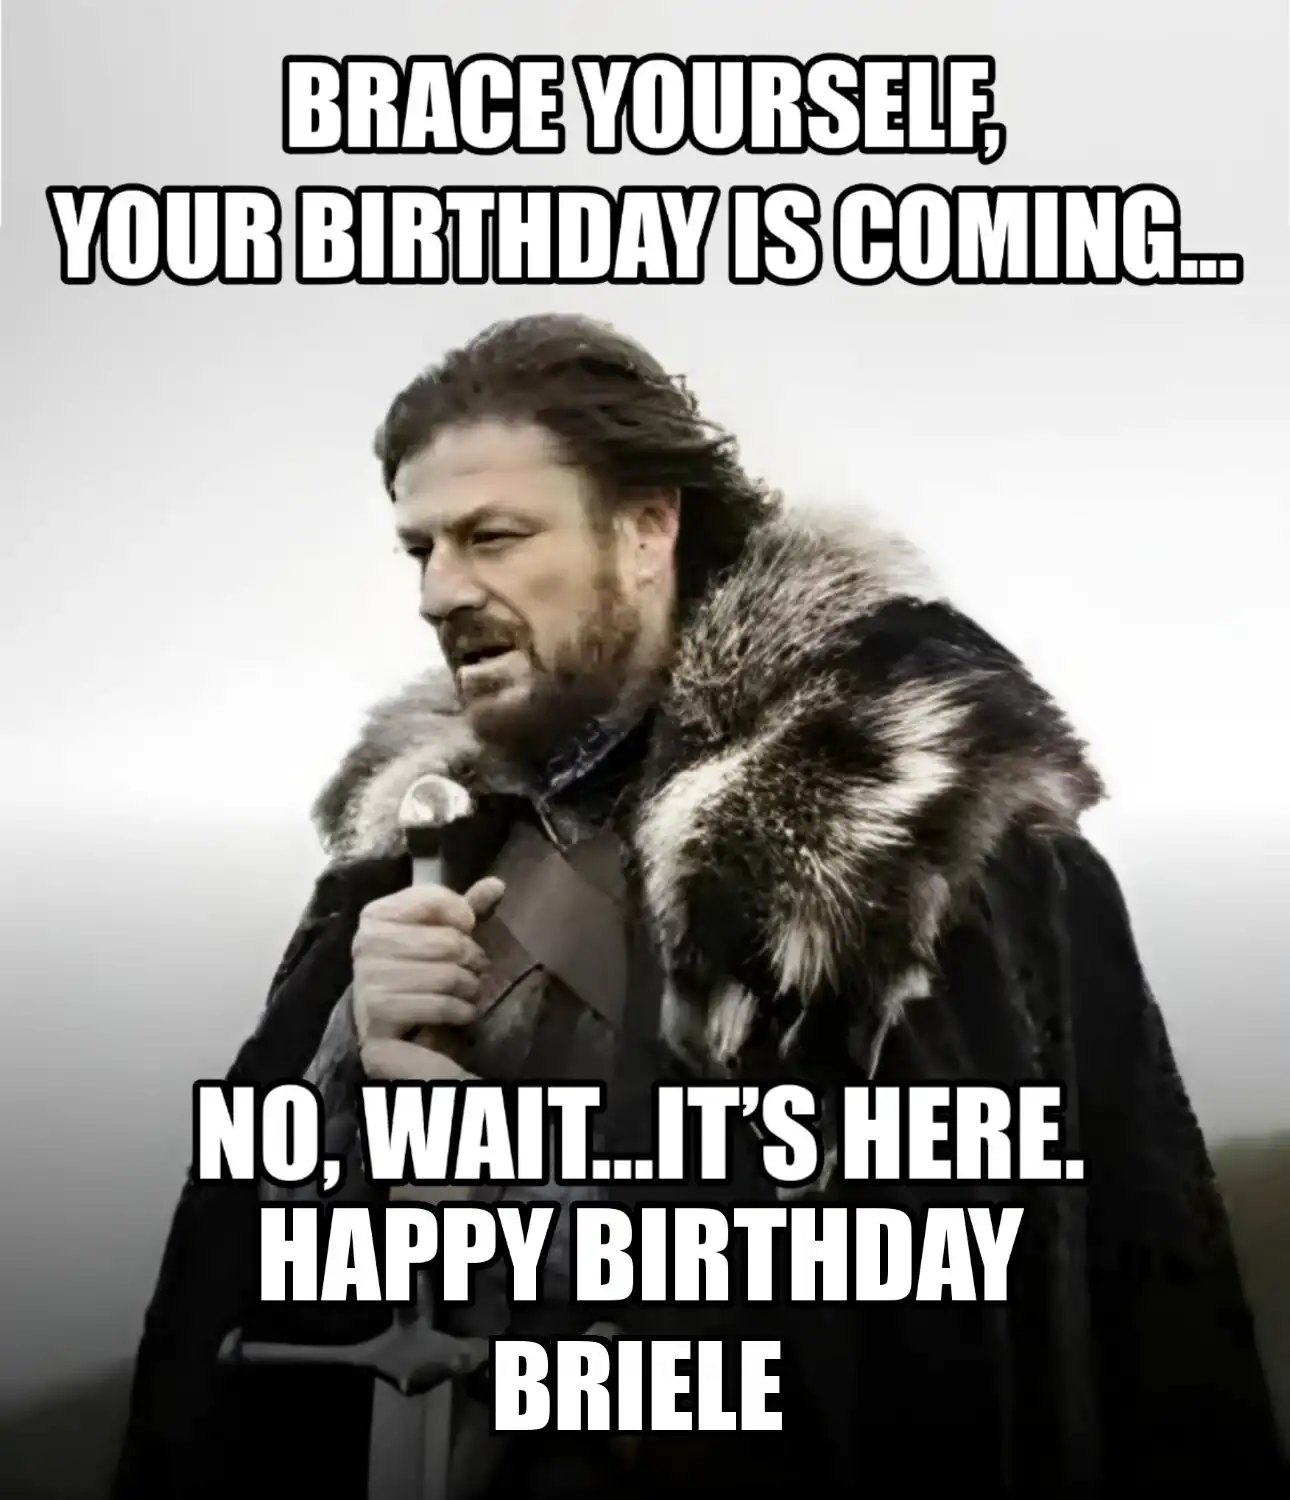 Happy Birthday Briele Brace Yourself Your Birthday Is Coming Meme